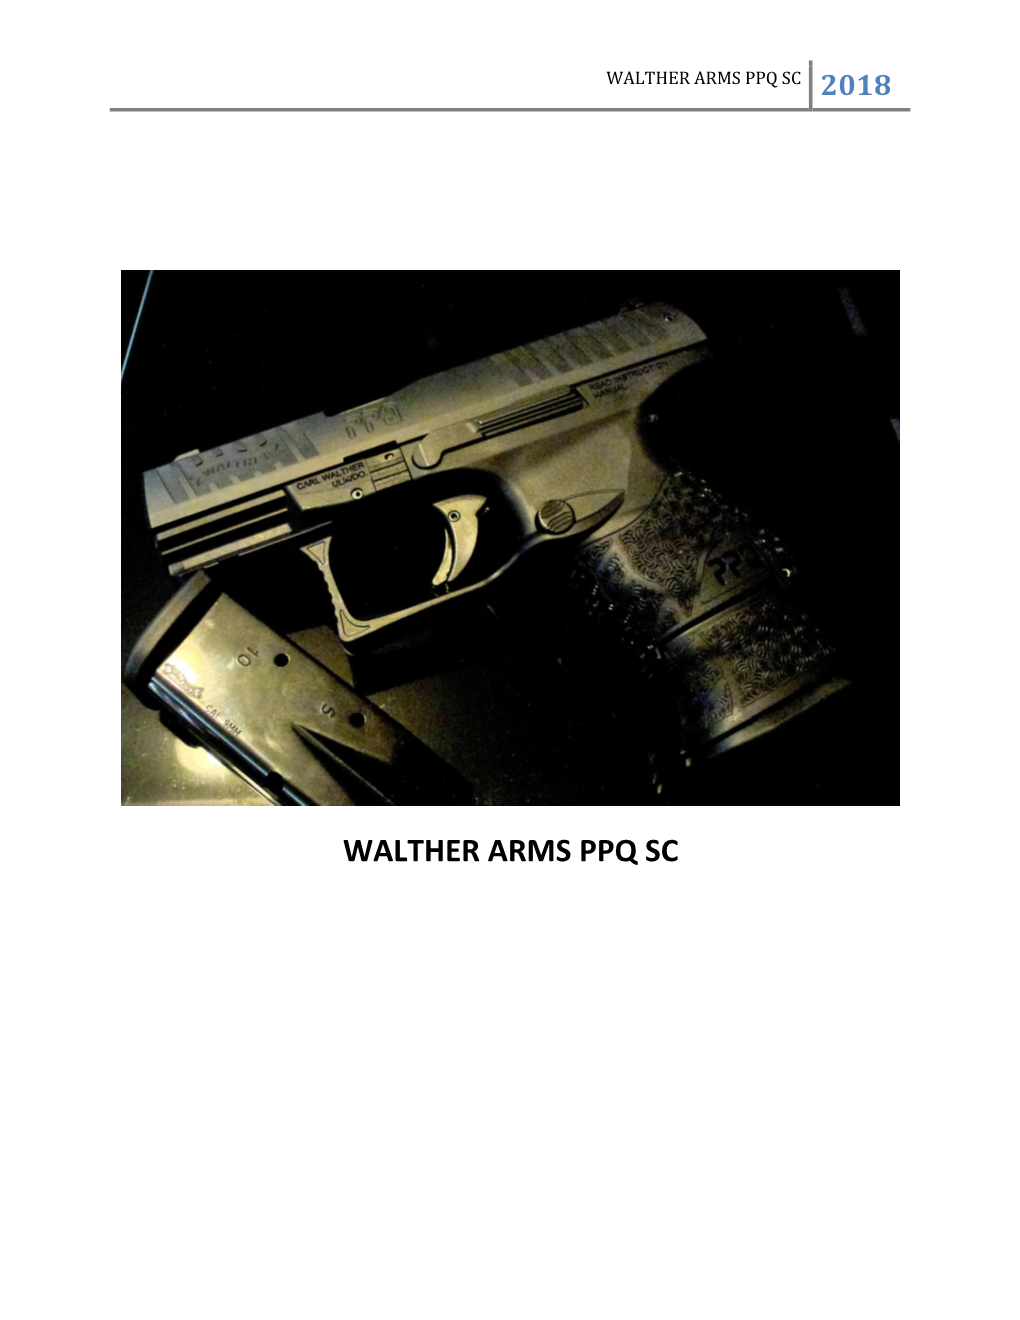 Walther Arms Ppq Sc 2018